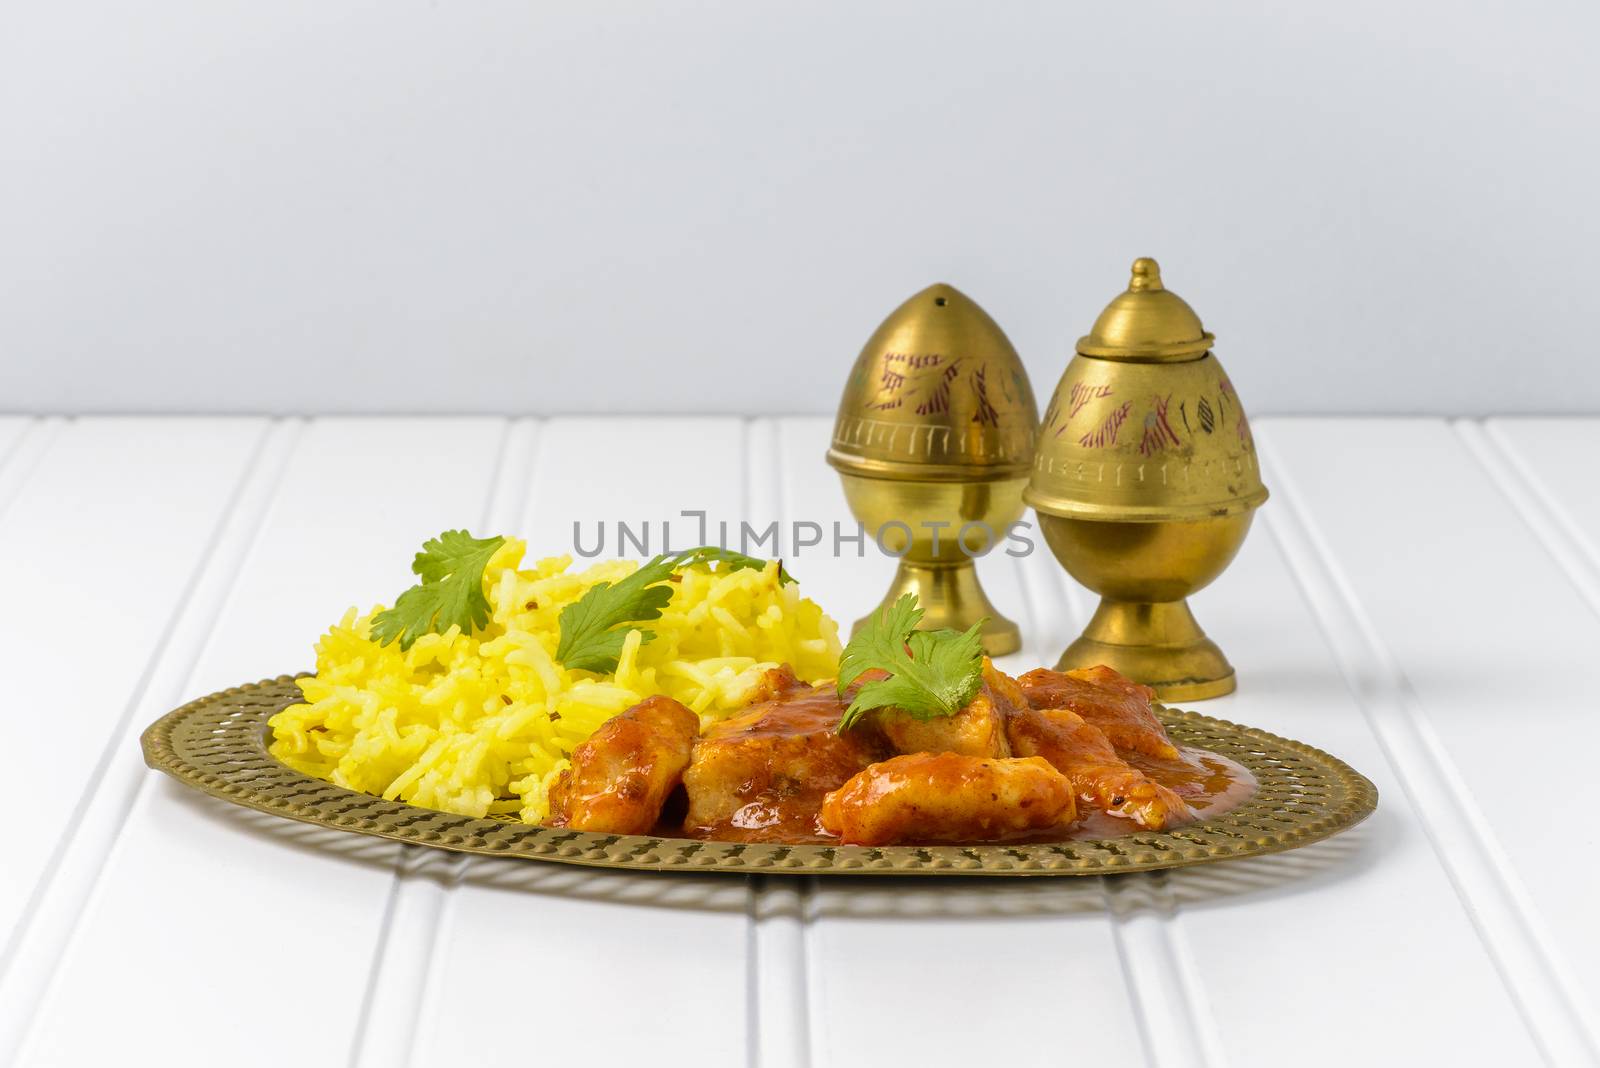 Dish if spicy chicken vindaloo served with basmati rice.